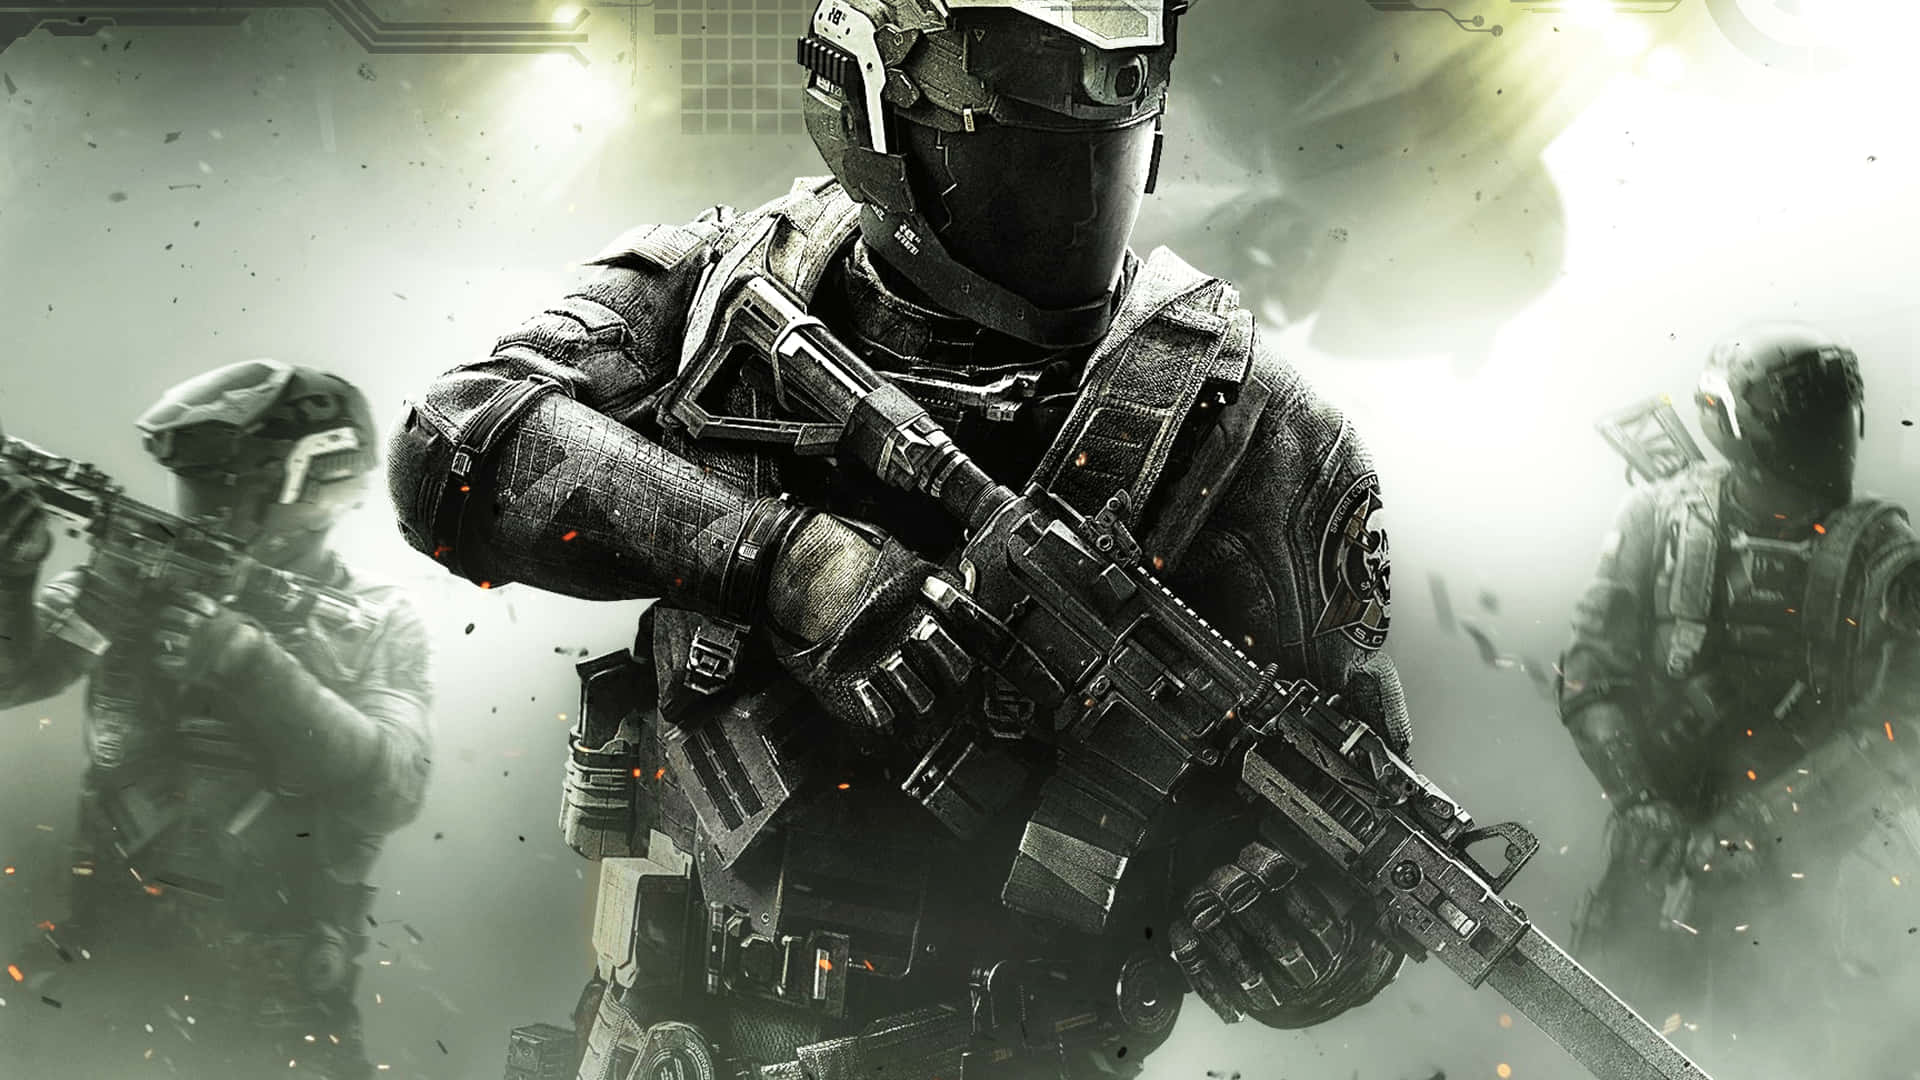 Enjoy Intense Military Engagements With The Iconic Call Of Duty Full Hd. Wallpaper